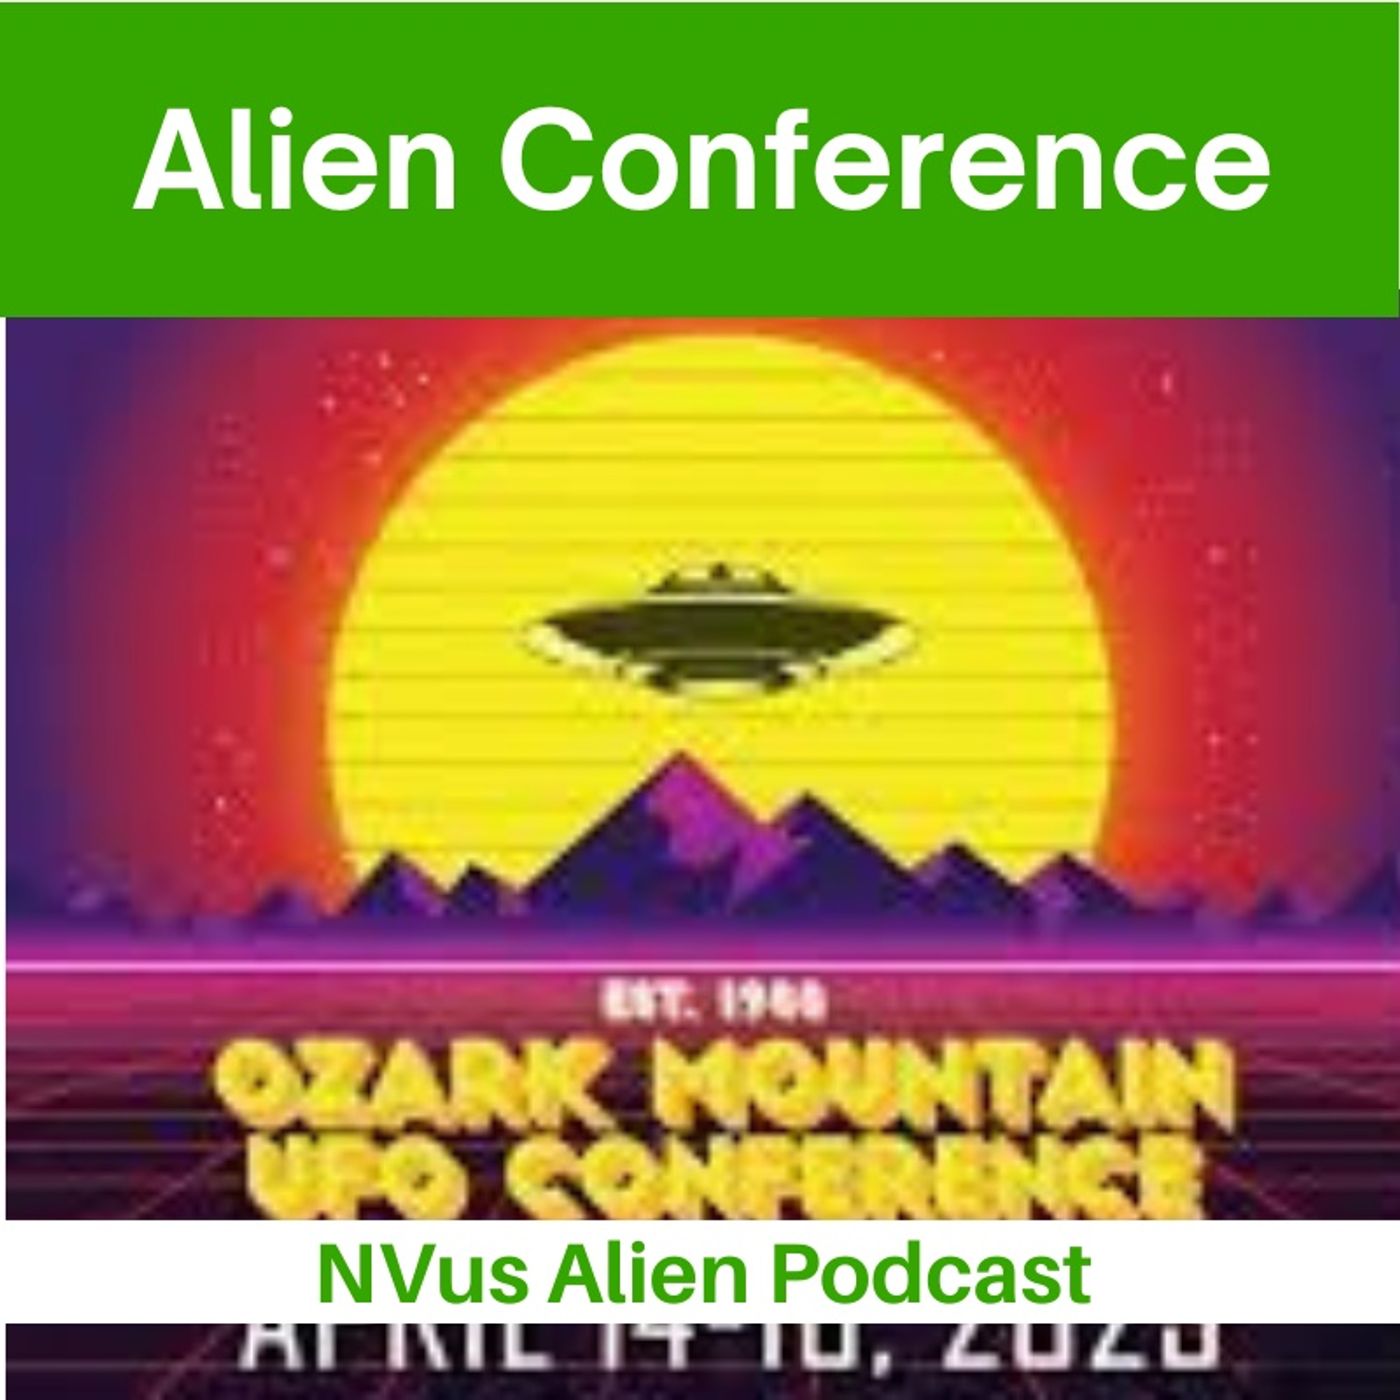 Remote Viewing, Aliens and Synchronicities (The Ozark Mountain UFO Conference Pt 1)